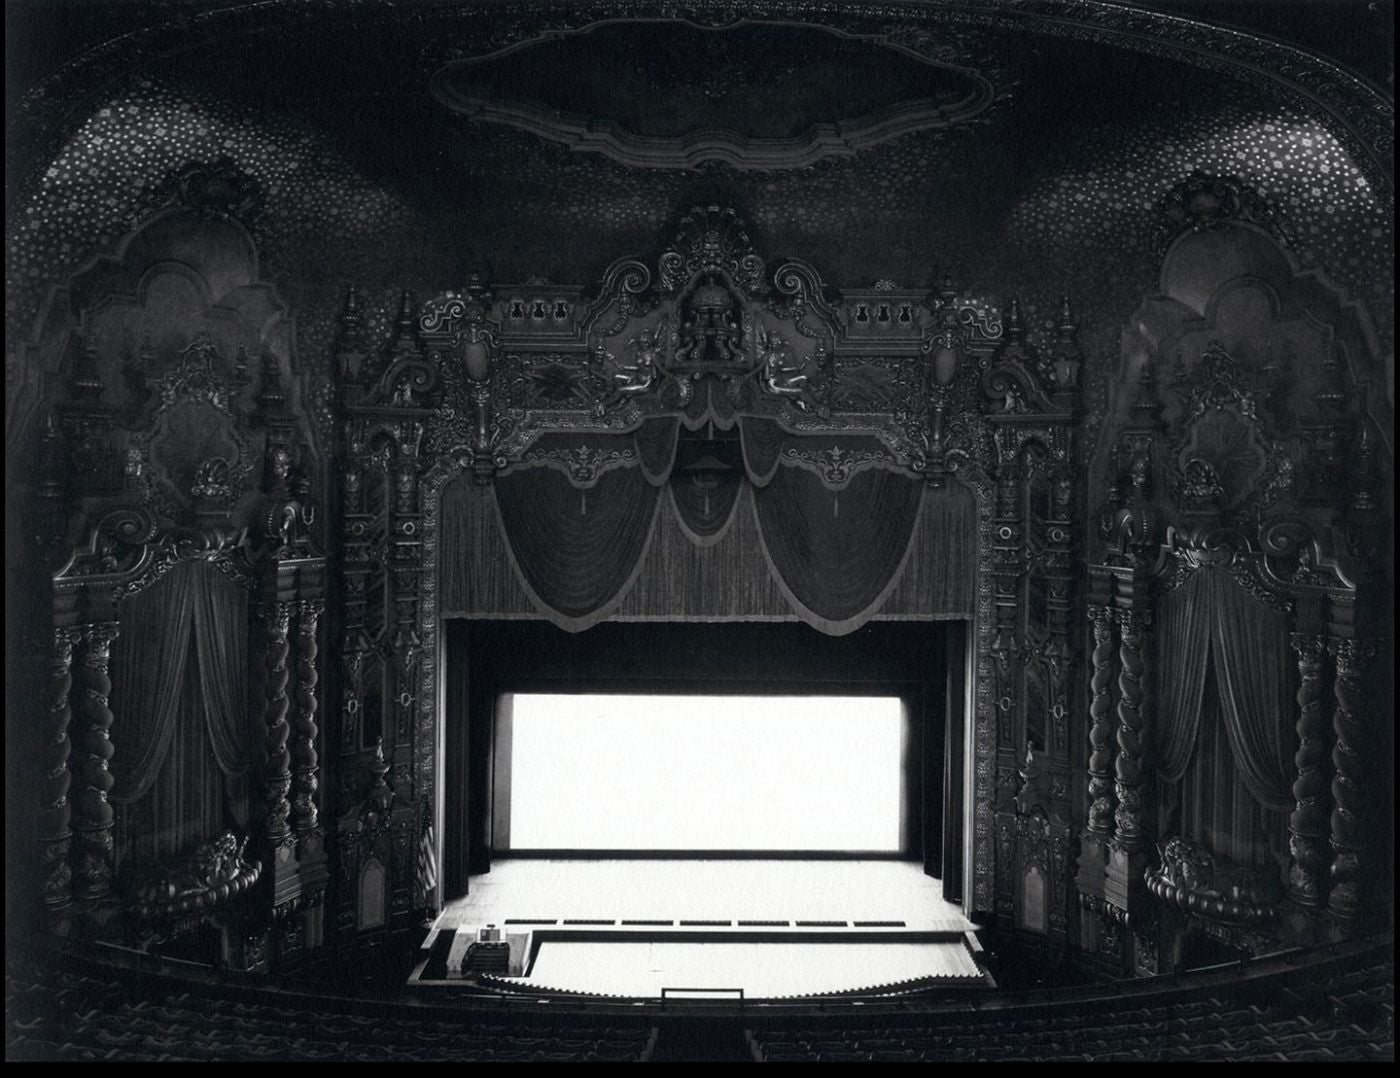 Hiroshi Sugimoto: Theaters [SIGNED in English with a calligraphy brush]